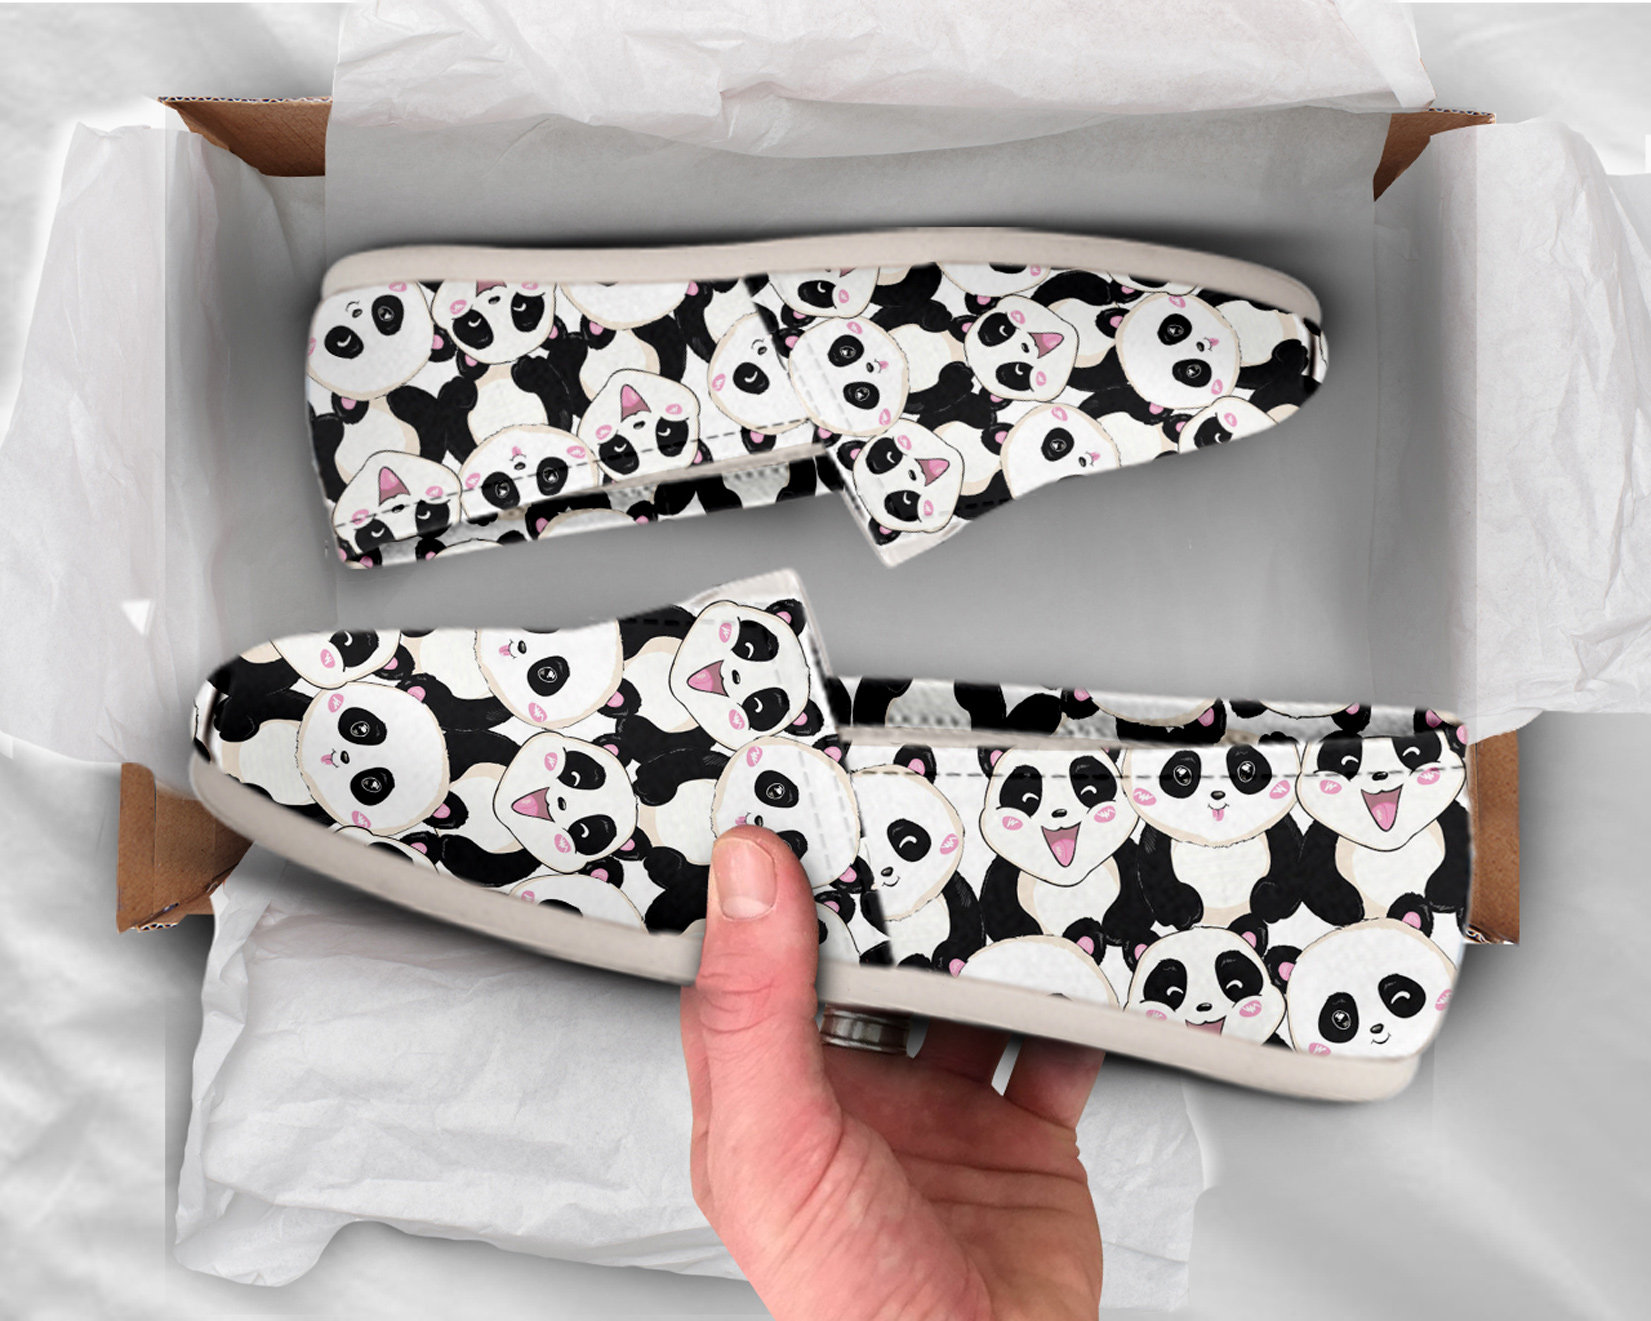 Panda World Shoes | Custom Canvas Sneakers For Kids & Adults